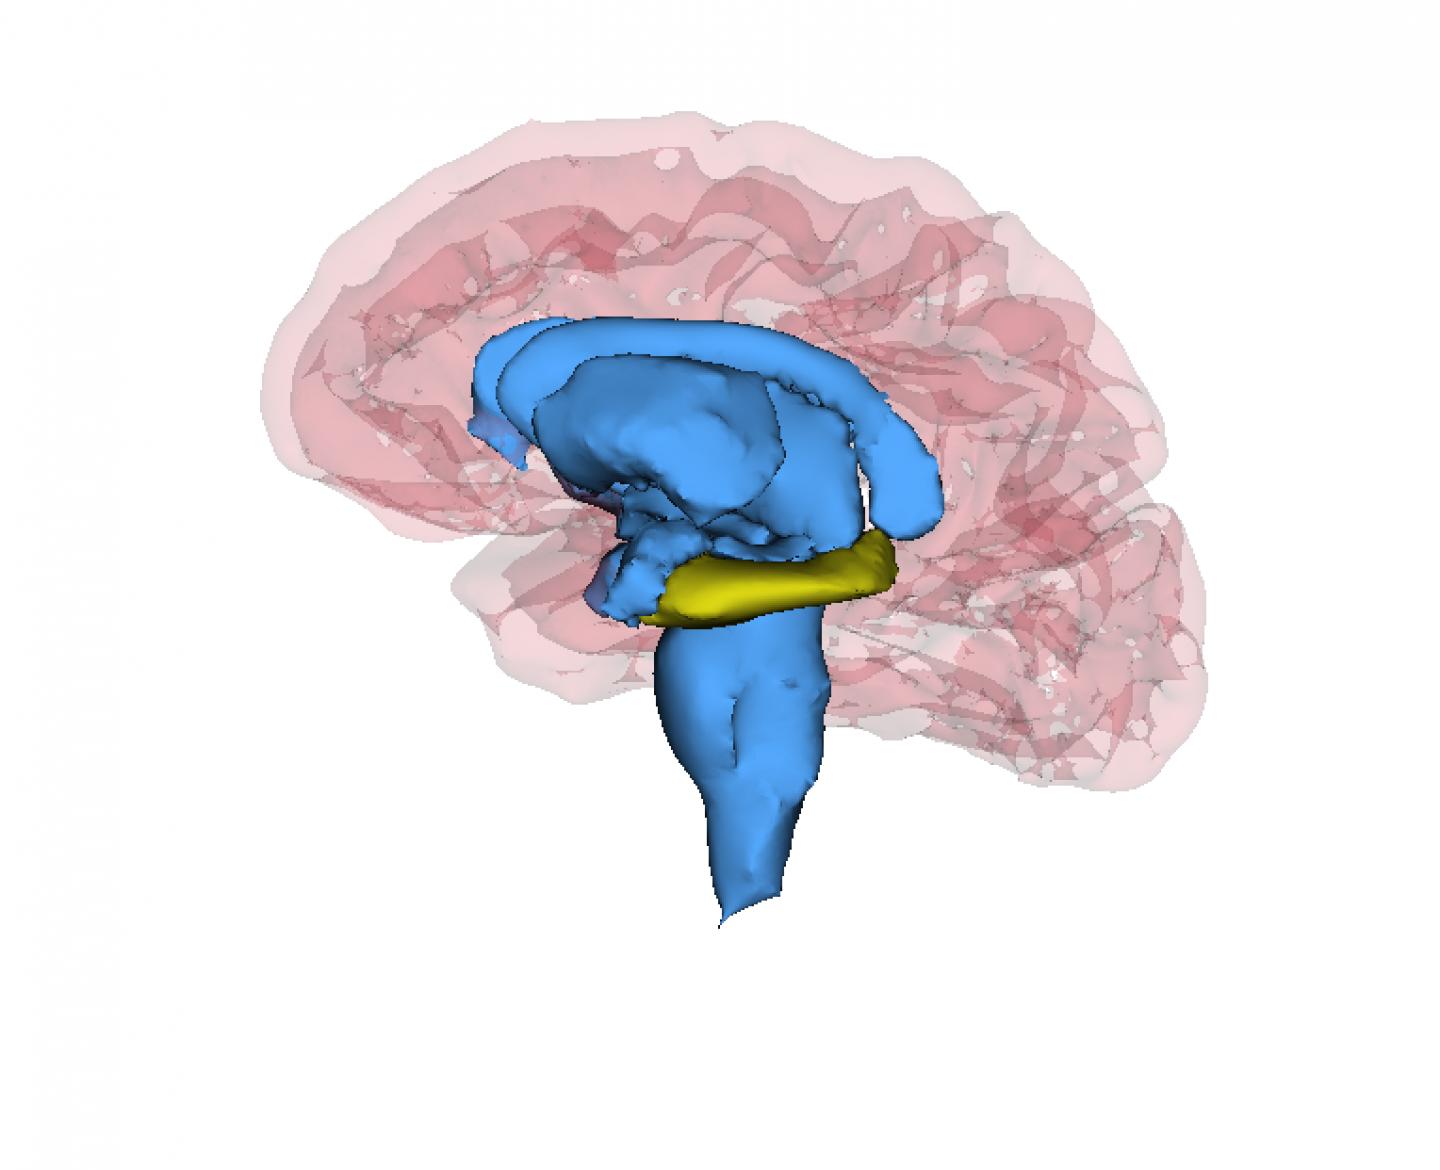 Example of Hippocampus (Highlighted in Yellow) in a Healthy Person.